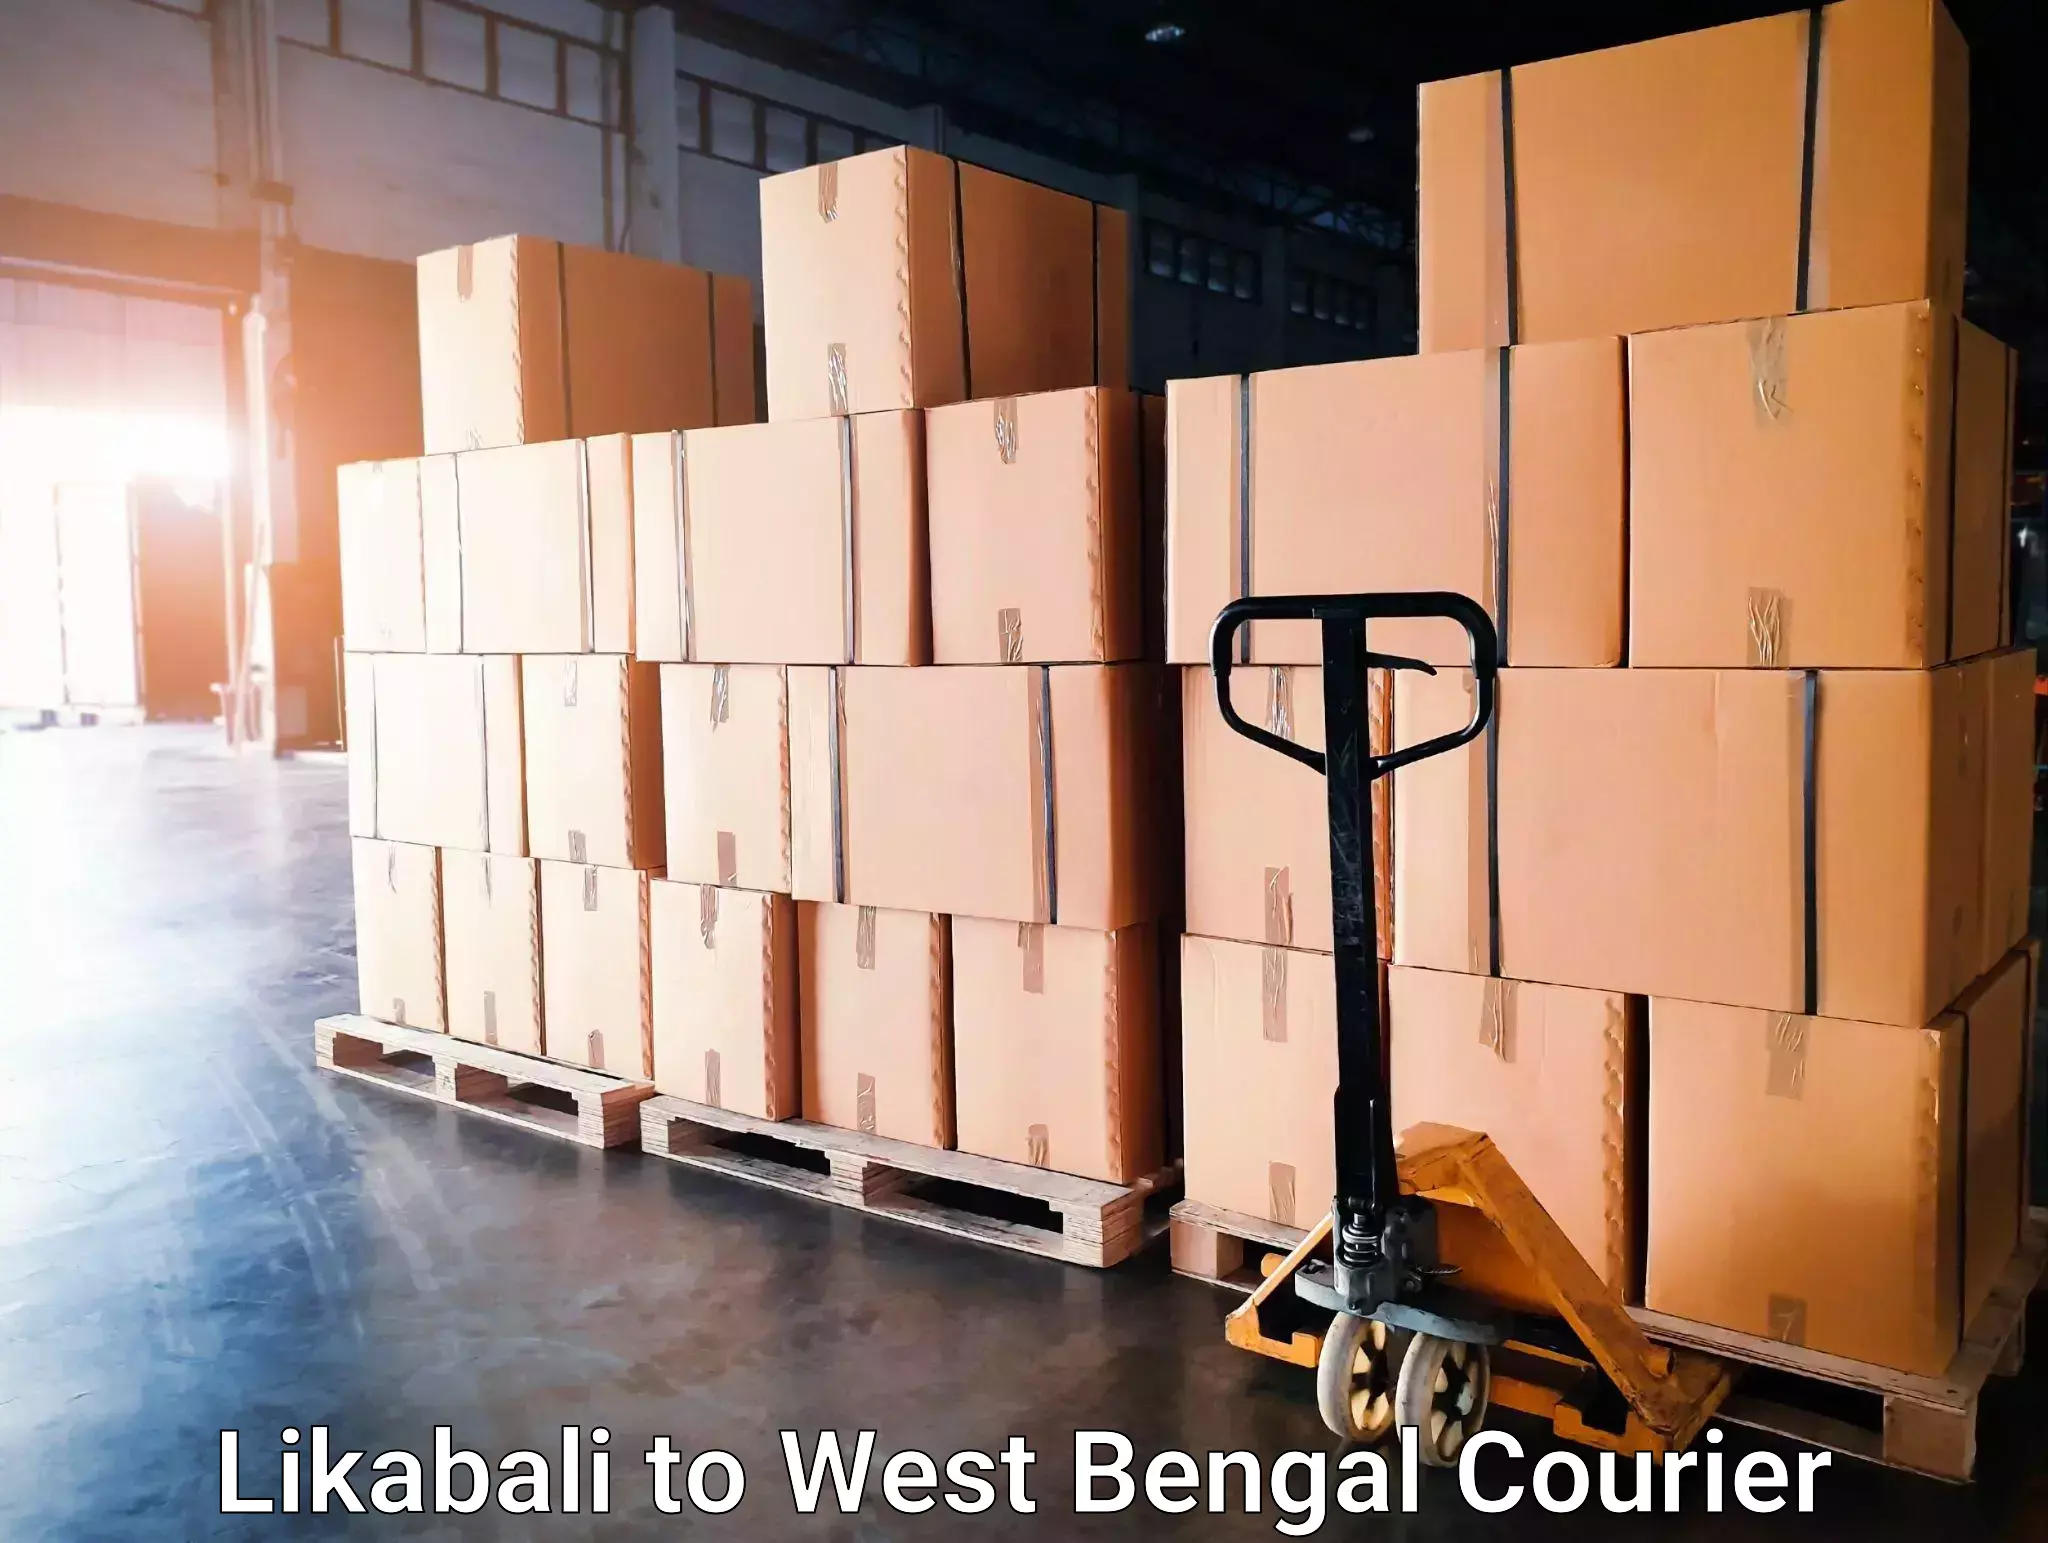 Courier service booking in Likabali to Tarkeshwar